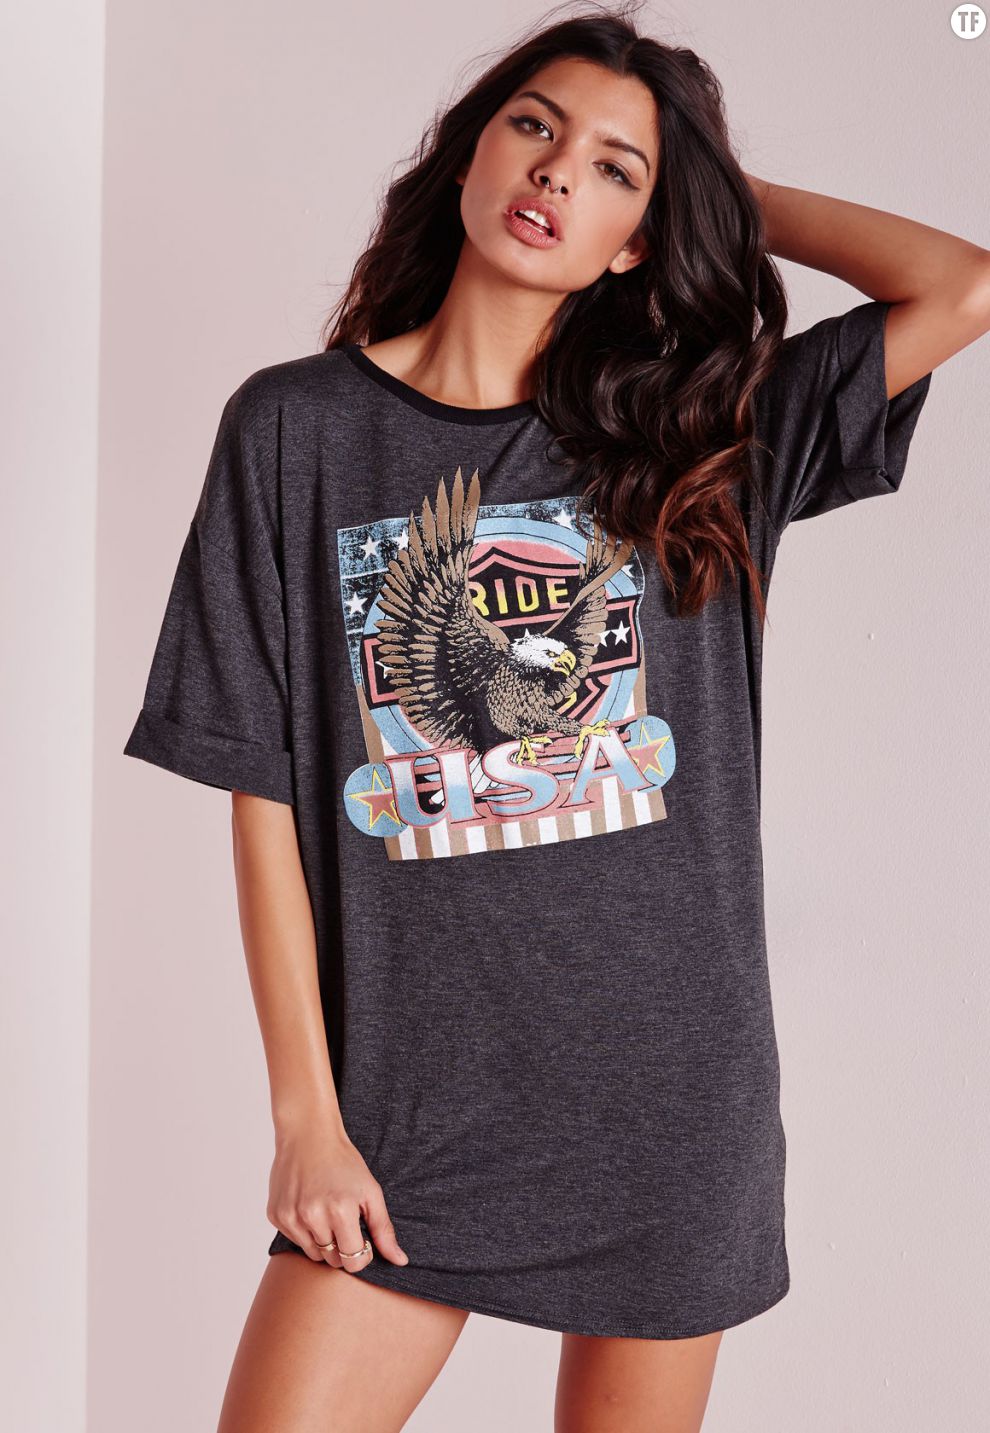  Robe t-shirt Missguided, 19,95€ 